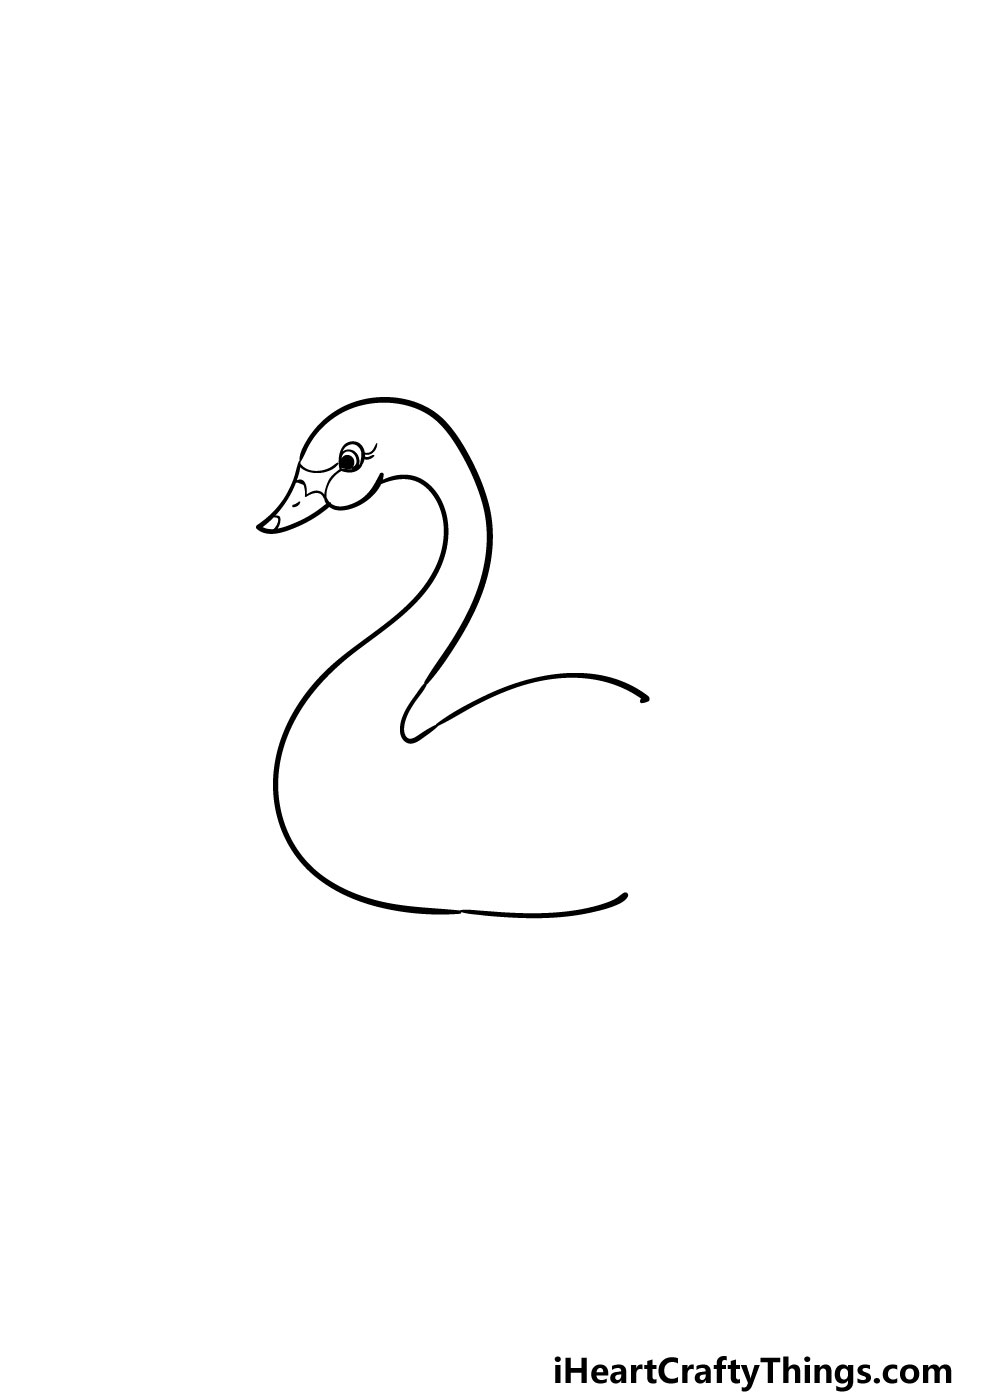 drawing a swan step 3